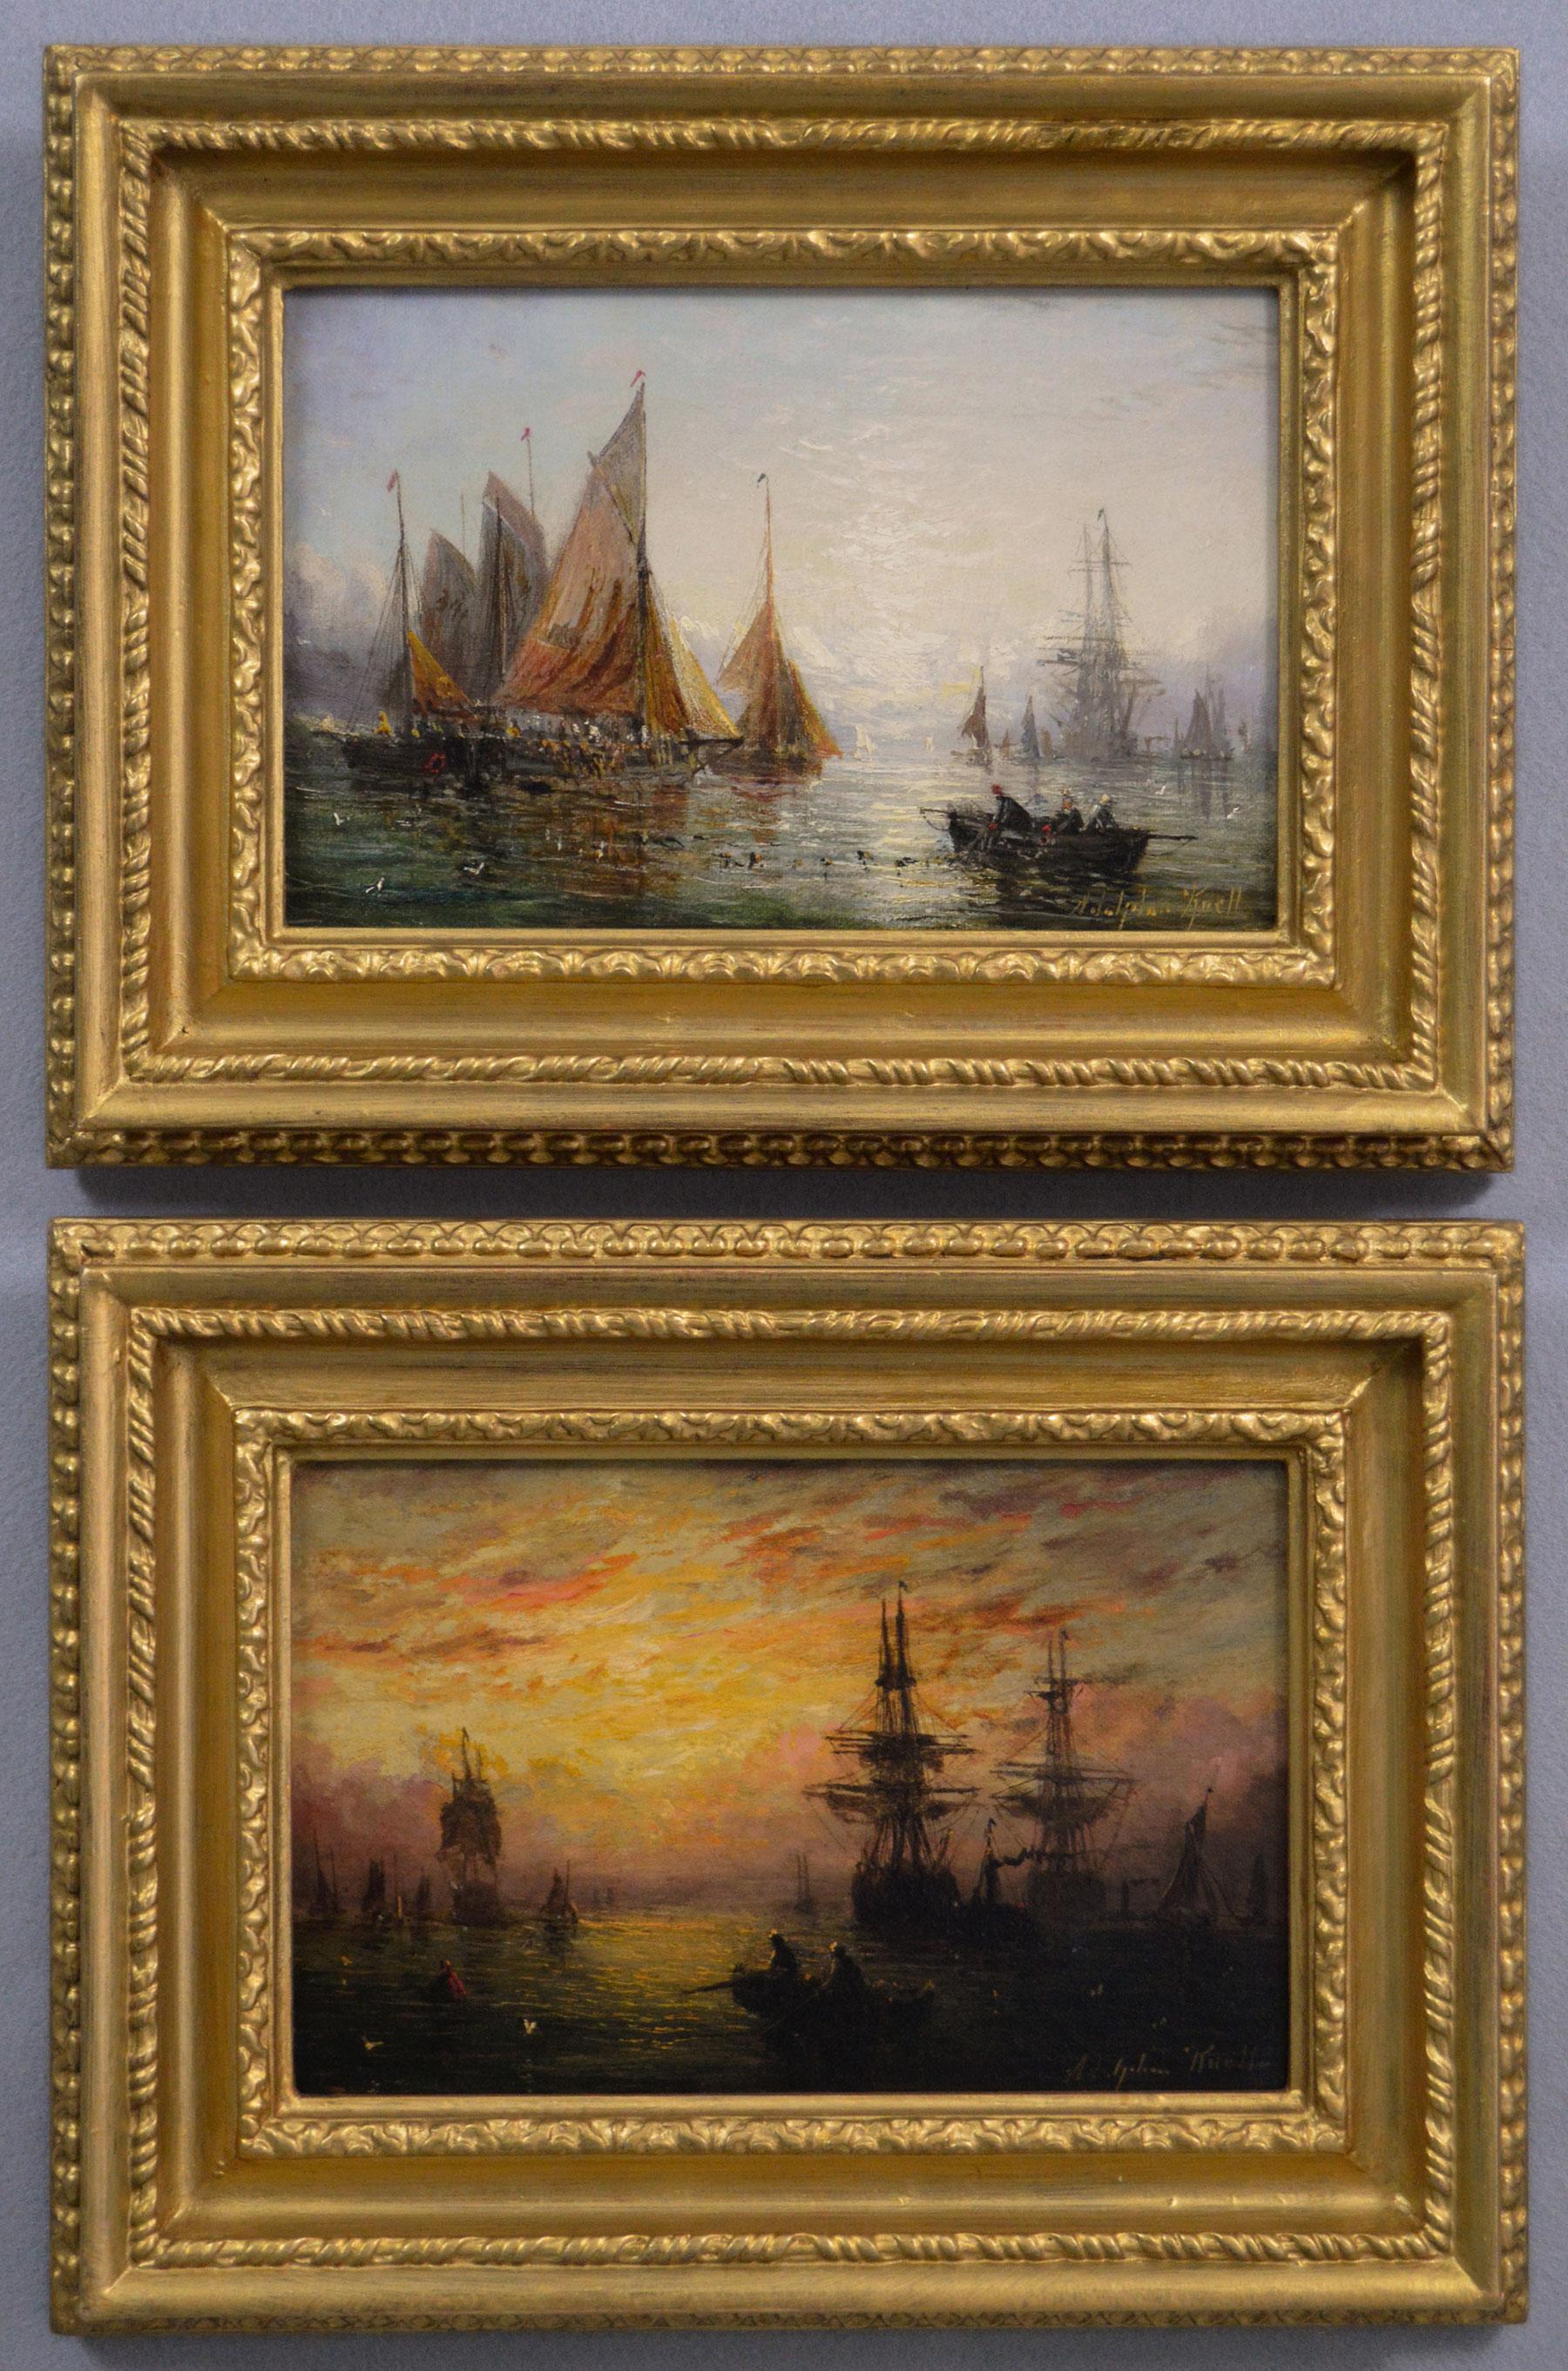 Adolphus Knell Landscape Painting - Pair of 19th Century seascape oil paintings of ships at anchor 